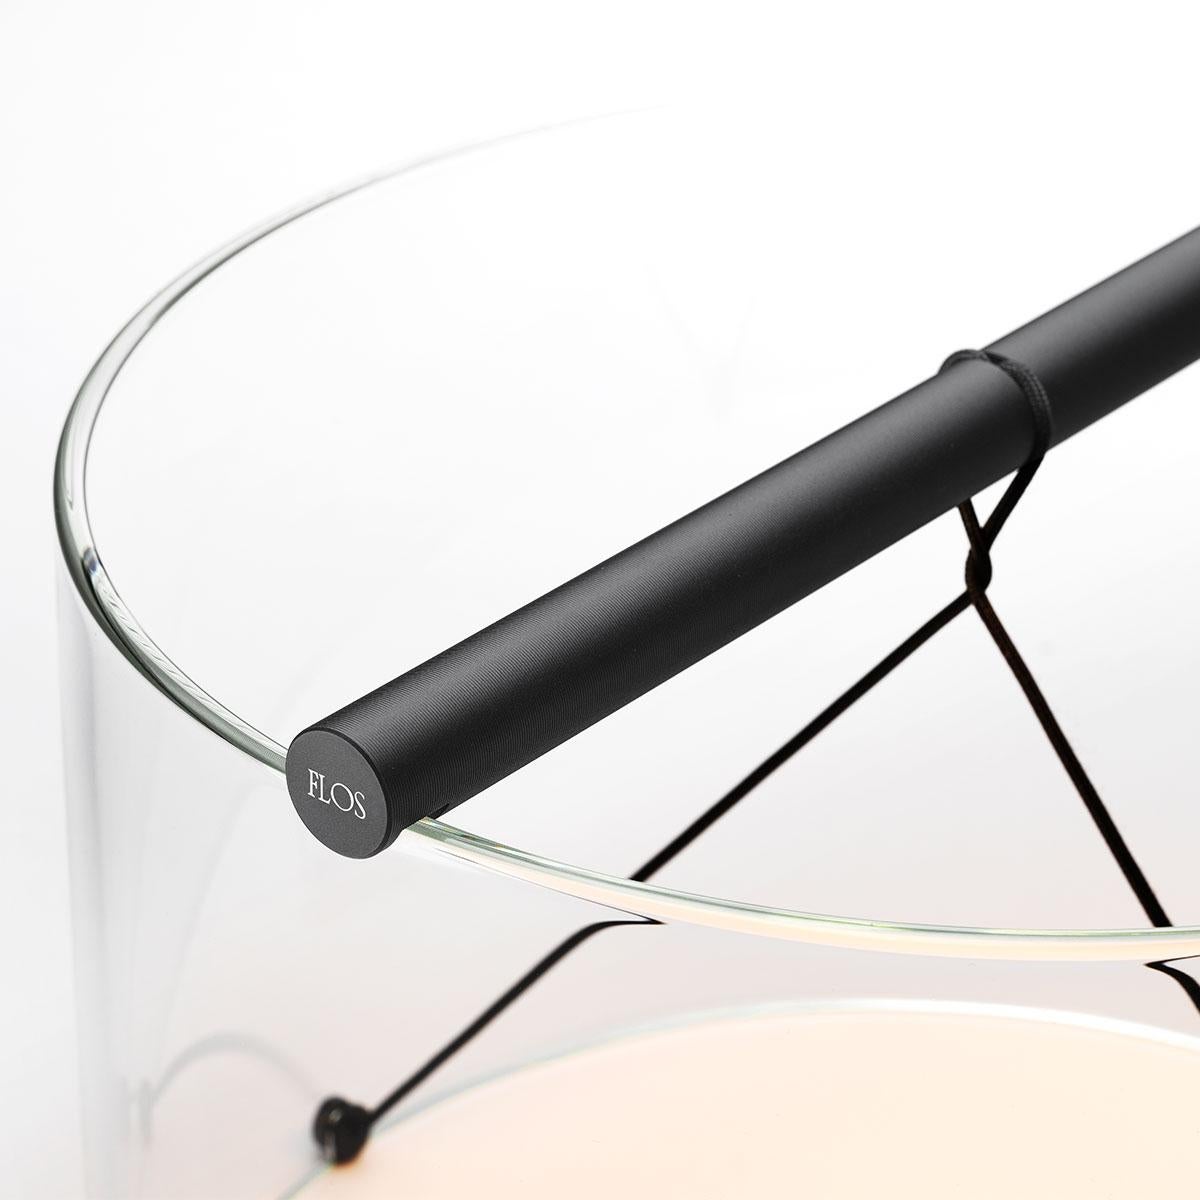 Flos To-Tie T1 Table Lamp in Anodized Black by Guglielmo Poletti In New Condition For Sale In Brooklyn, NY